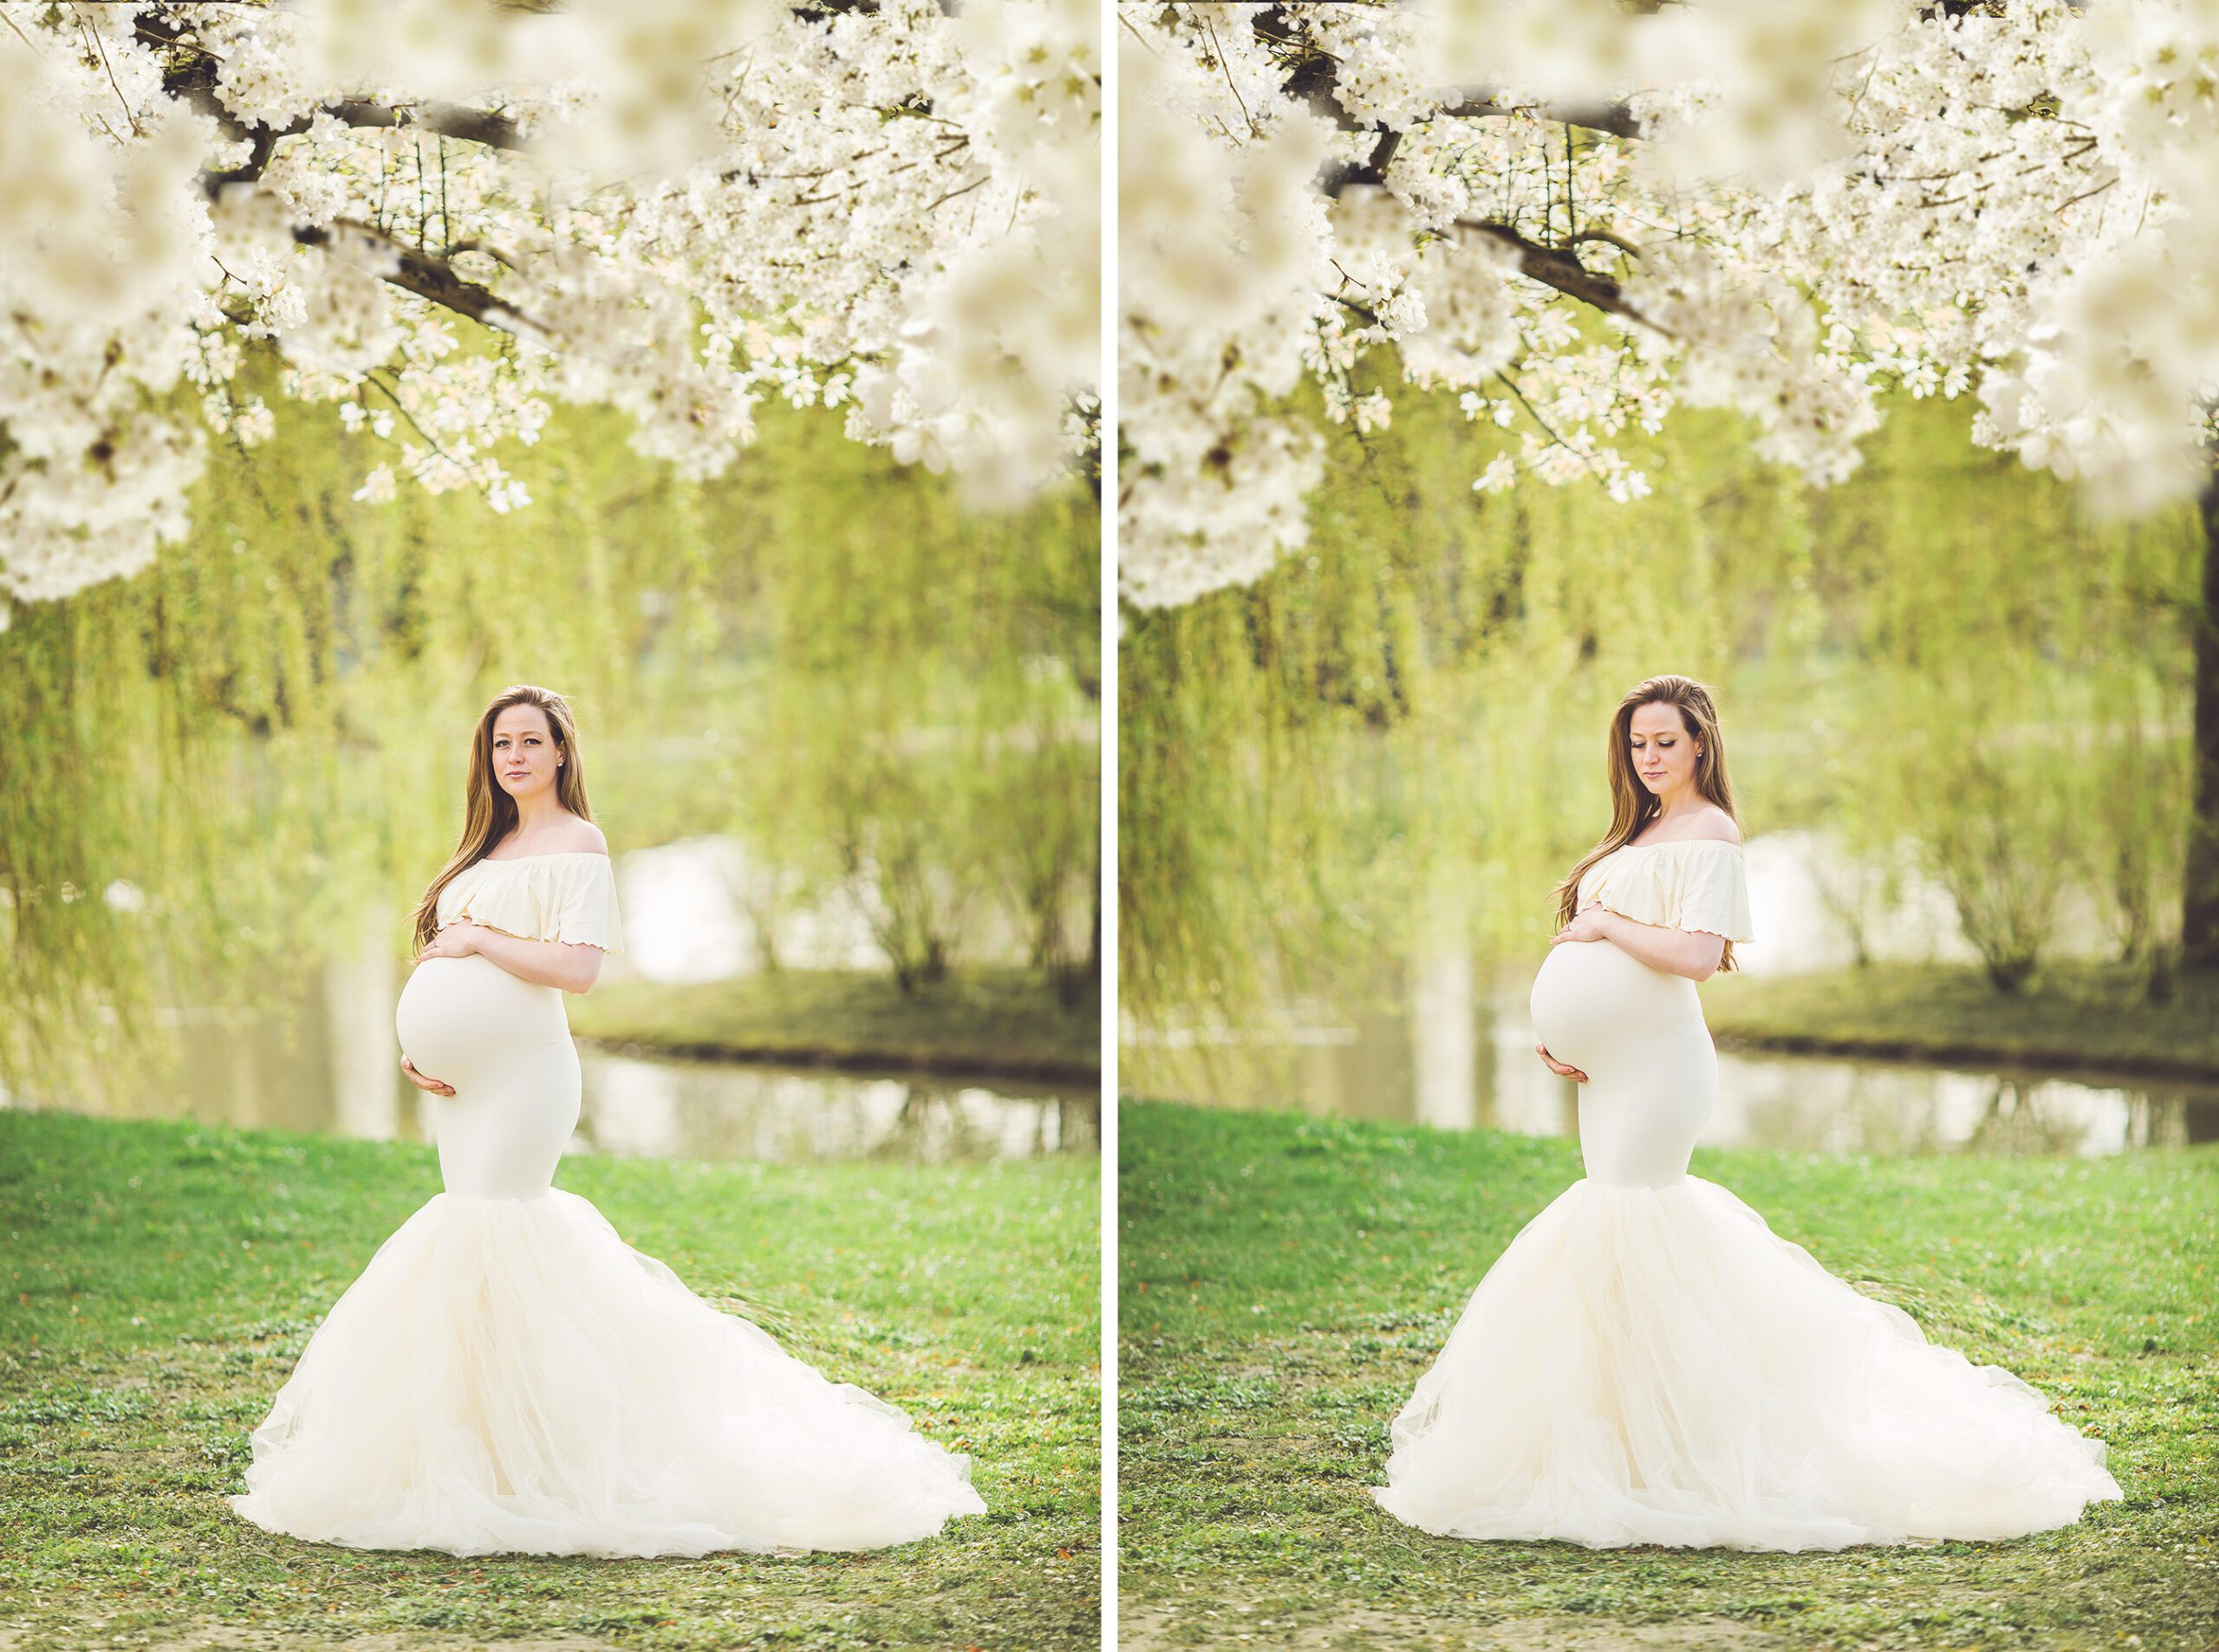 Spring petals for this spring maternity session